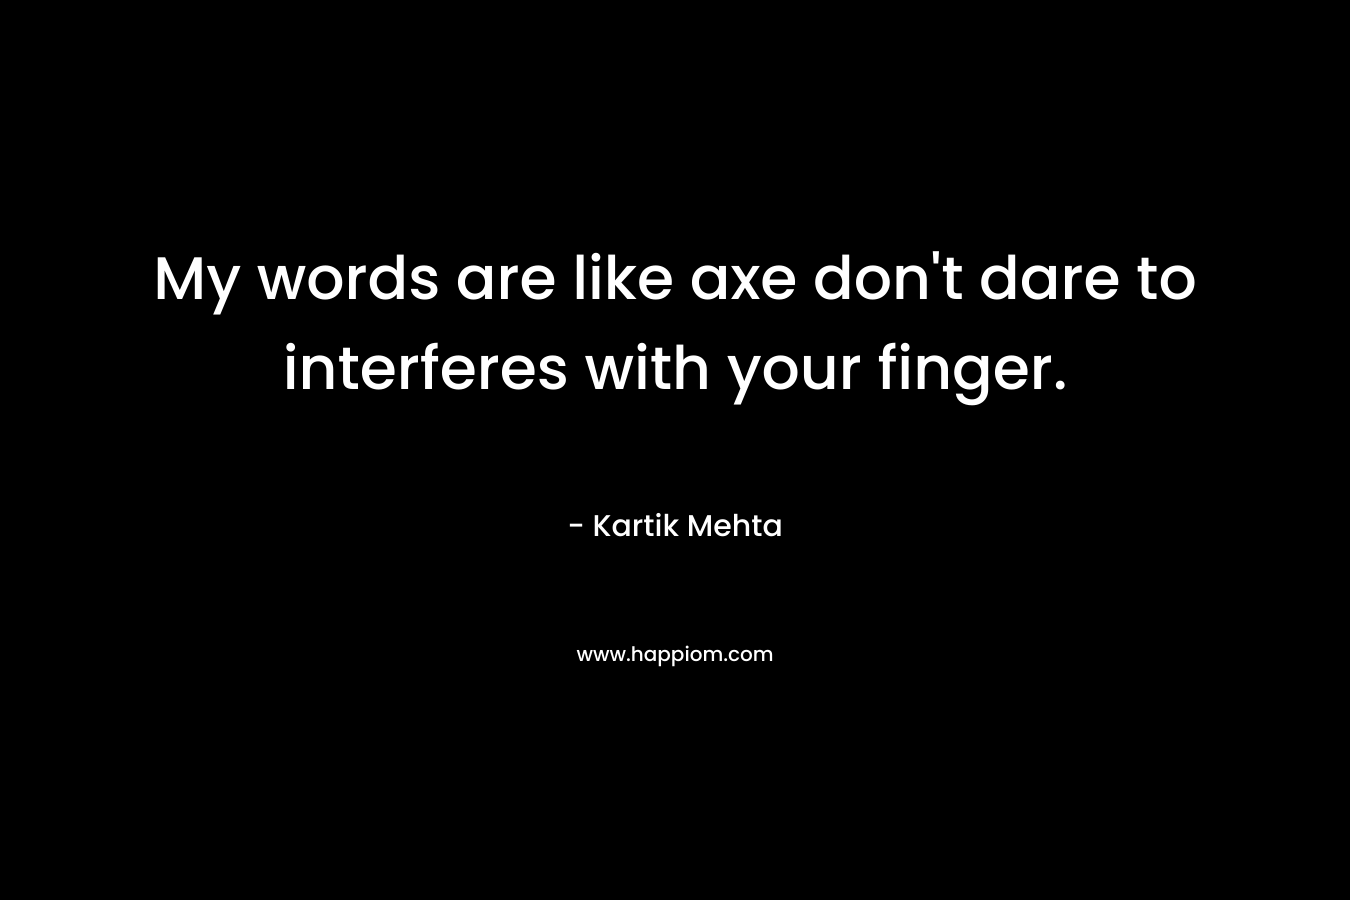 My words are like axe don’t dare to interferes with your finger. – Kartik Mehta